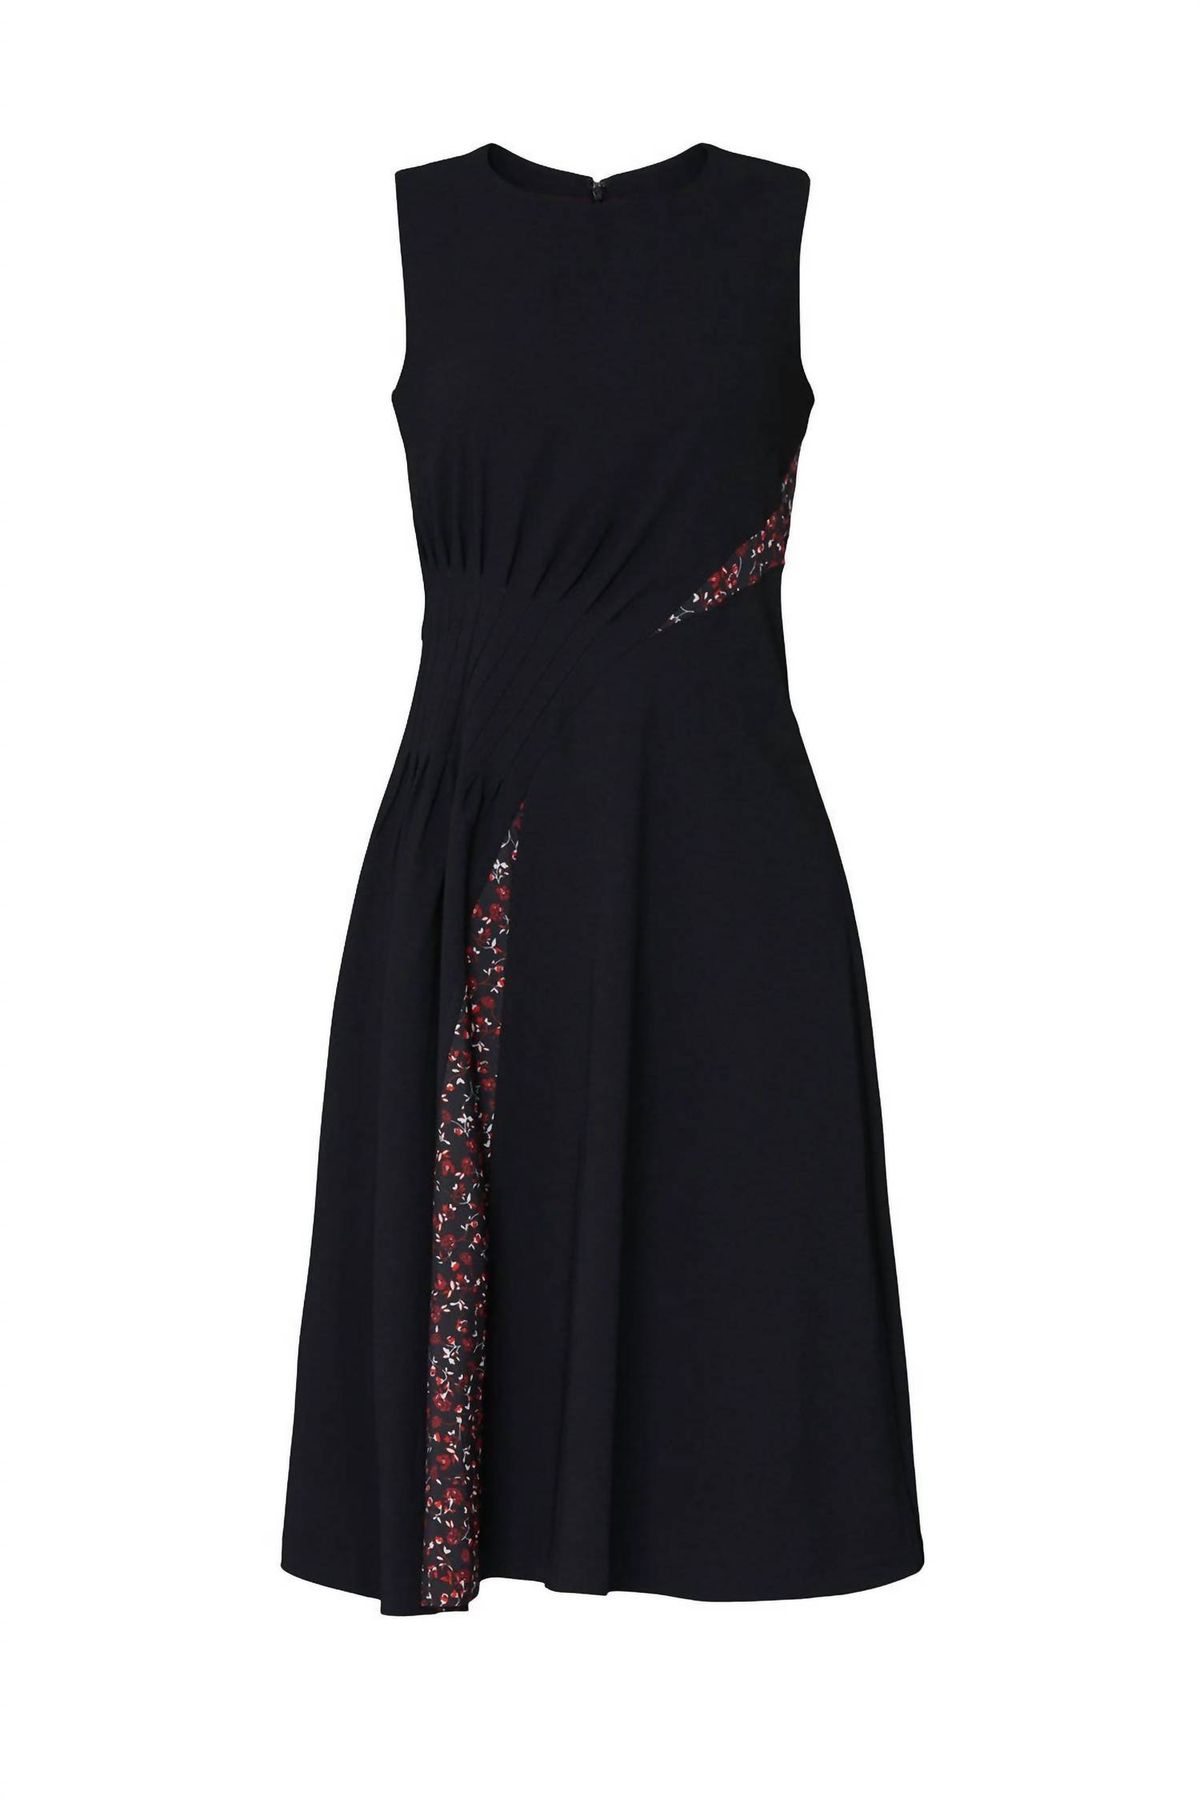 Style 1-2649523459-4818-1 Thakoon Size 4 Floral Black Cocktail Dress on Queenly